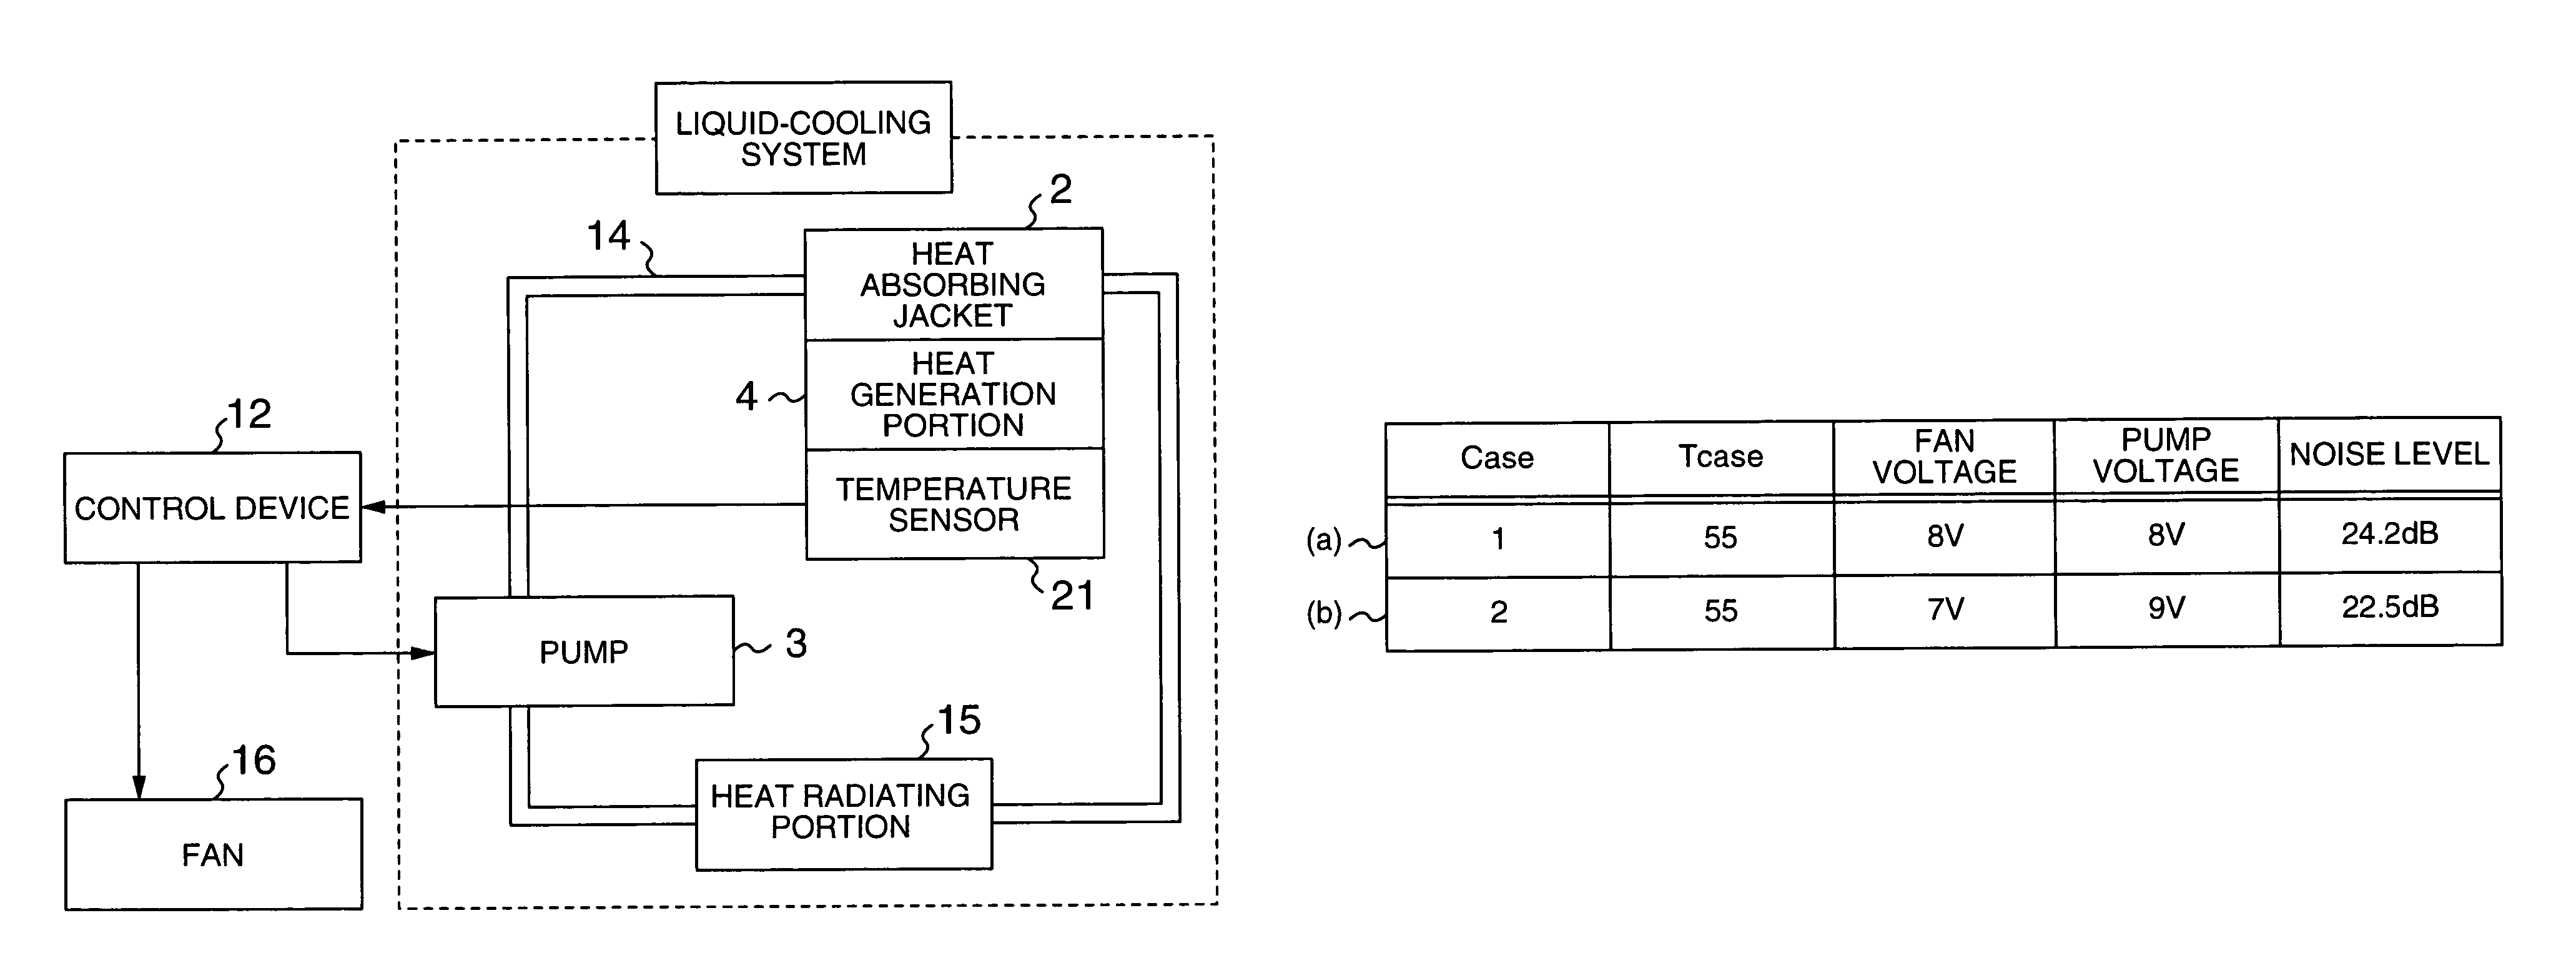 Electronic equipment provided with cooling system